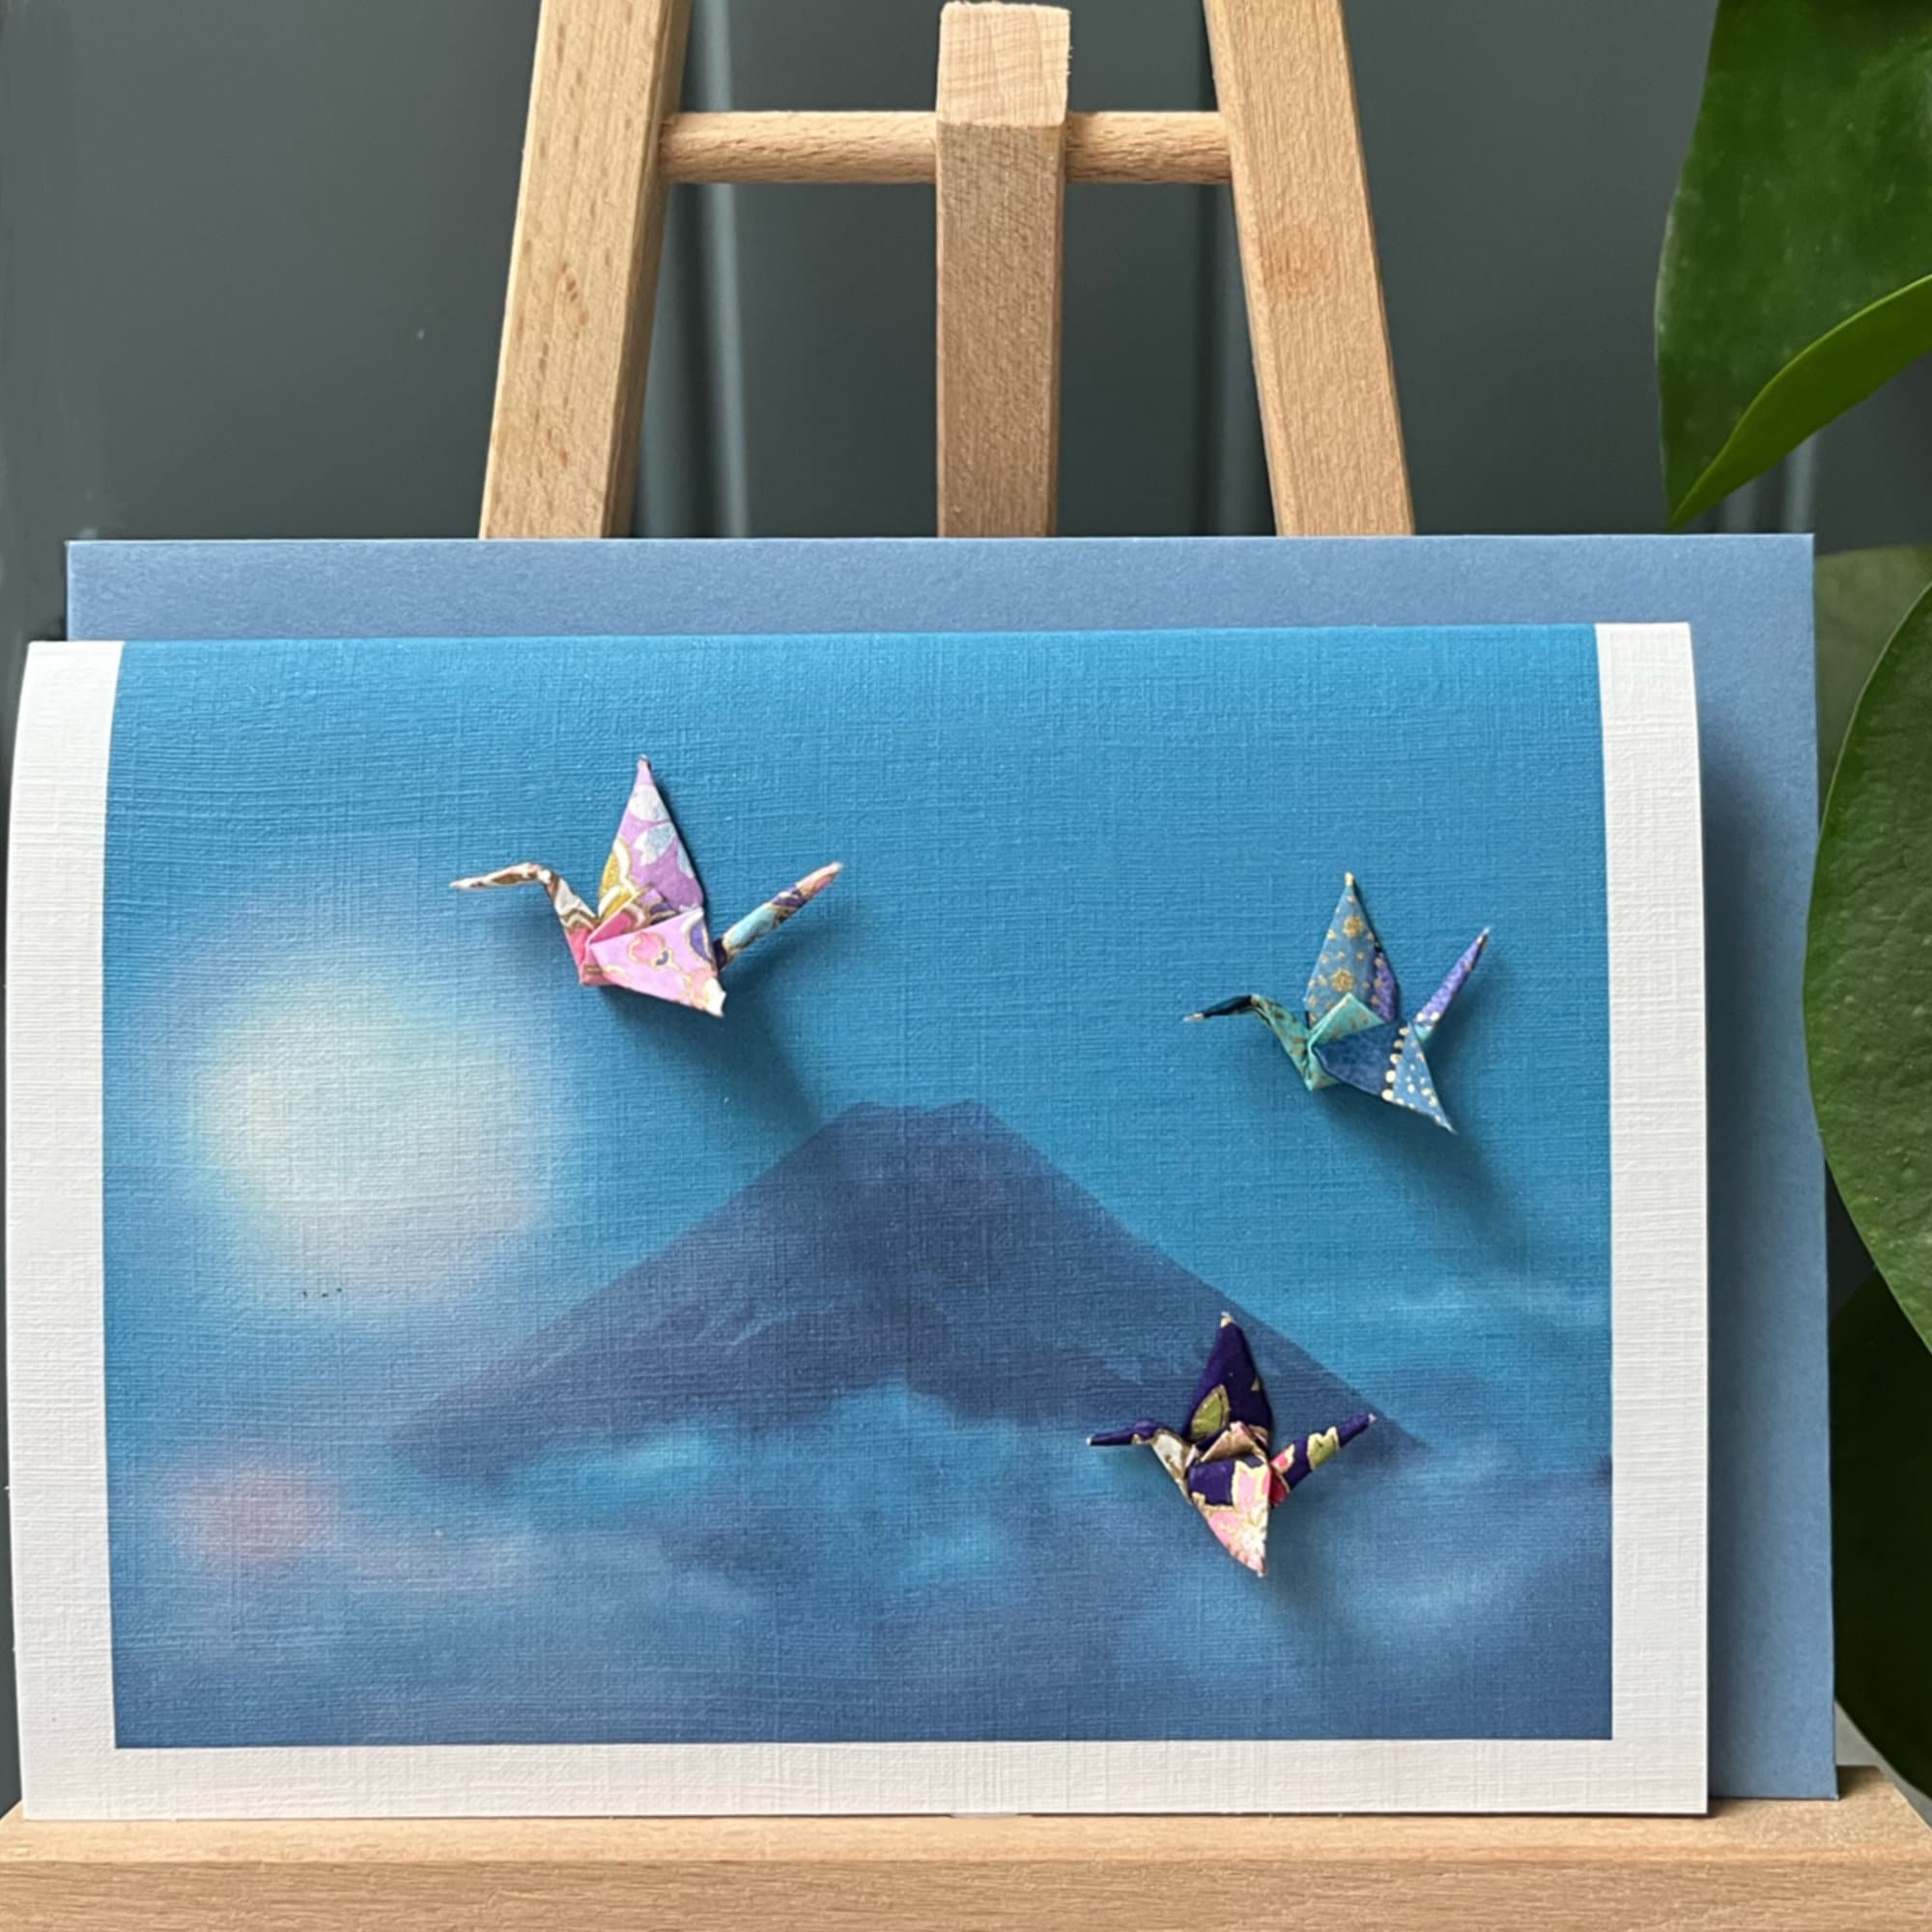 36 Views Mount Fuji 46 Large Origami Cranes Origami Paper Cranes Made of  15cm 6 Inches Japanese Paper Hokusai Ukiyoe Home Decoration Art 